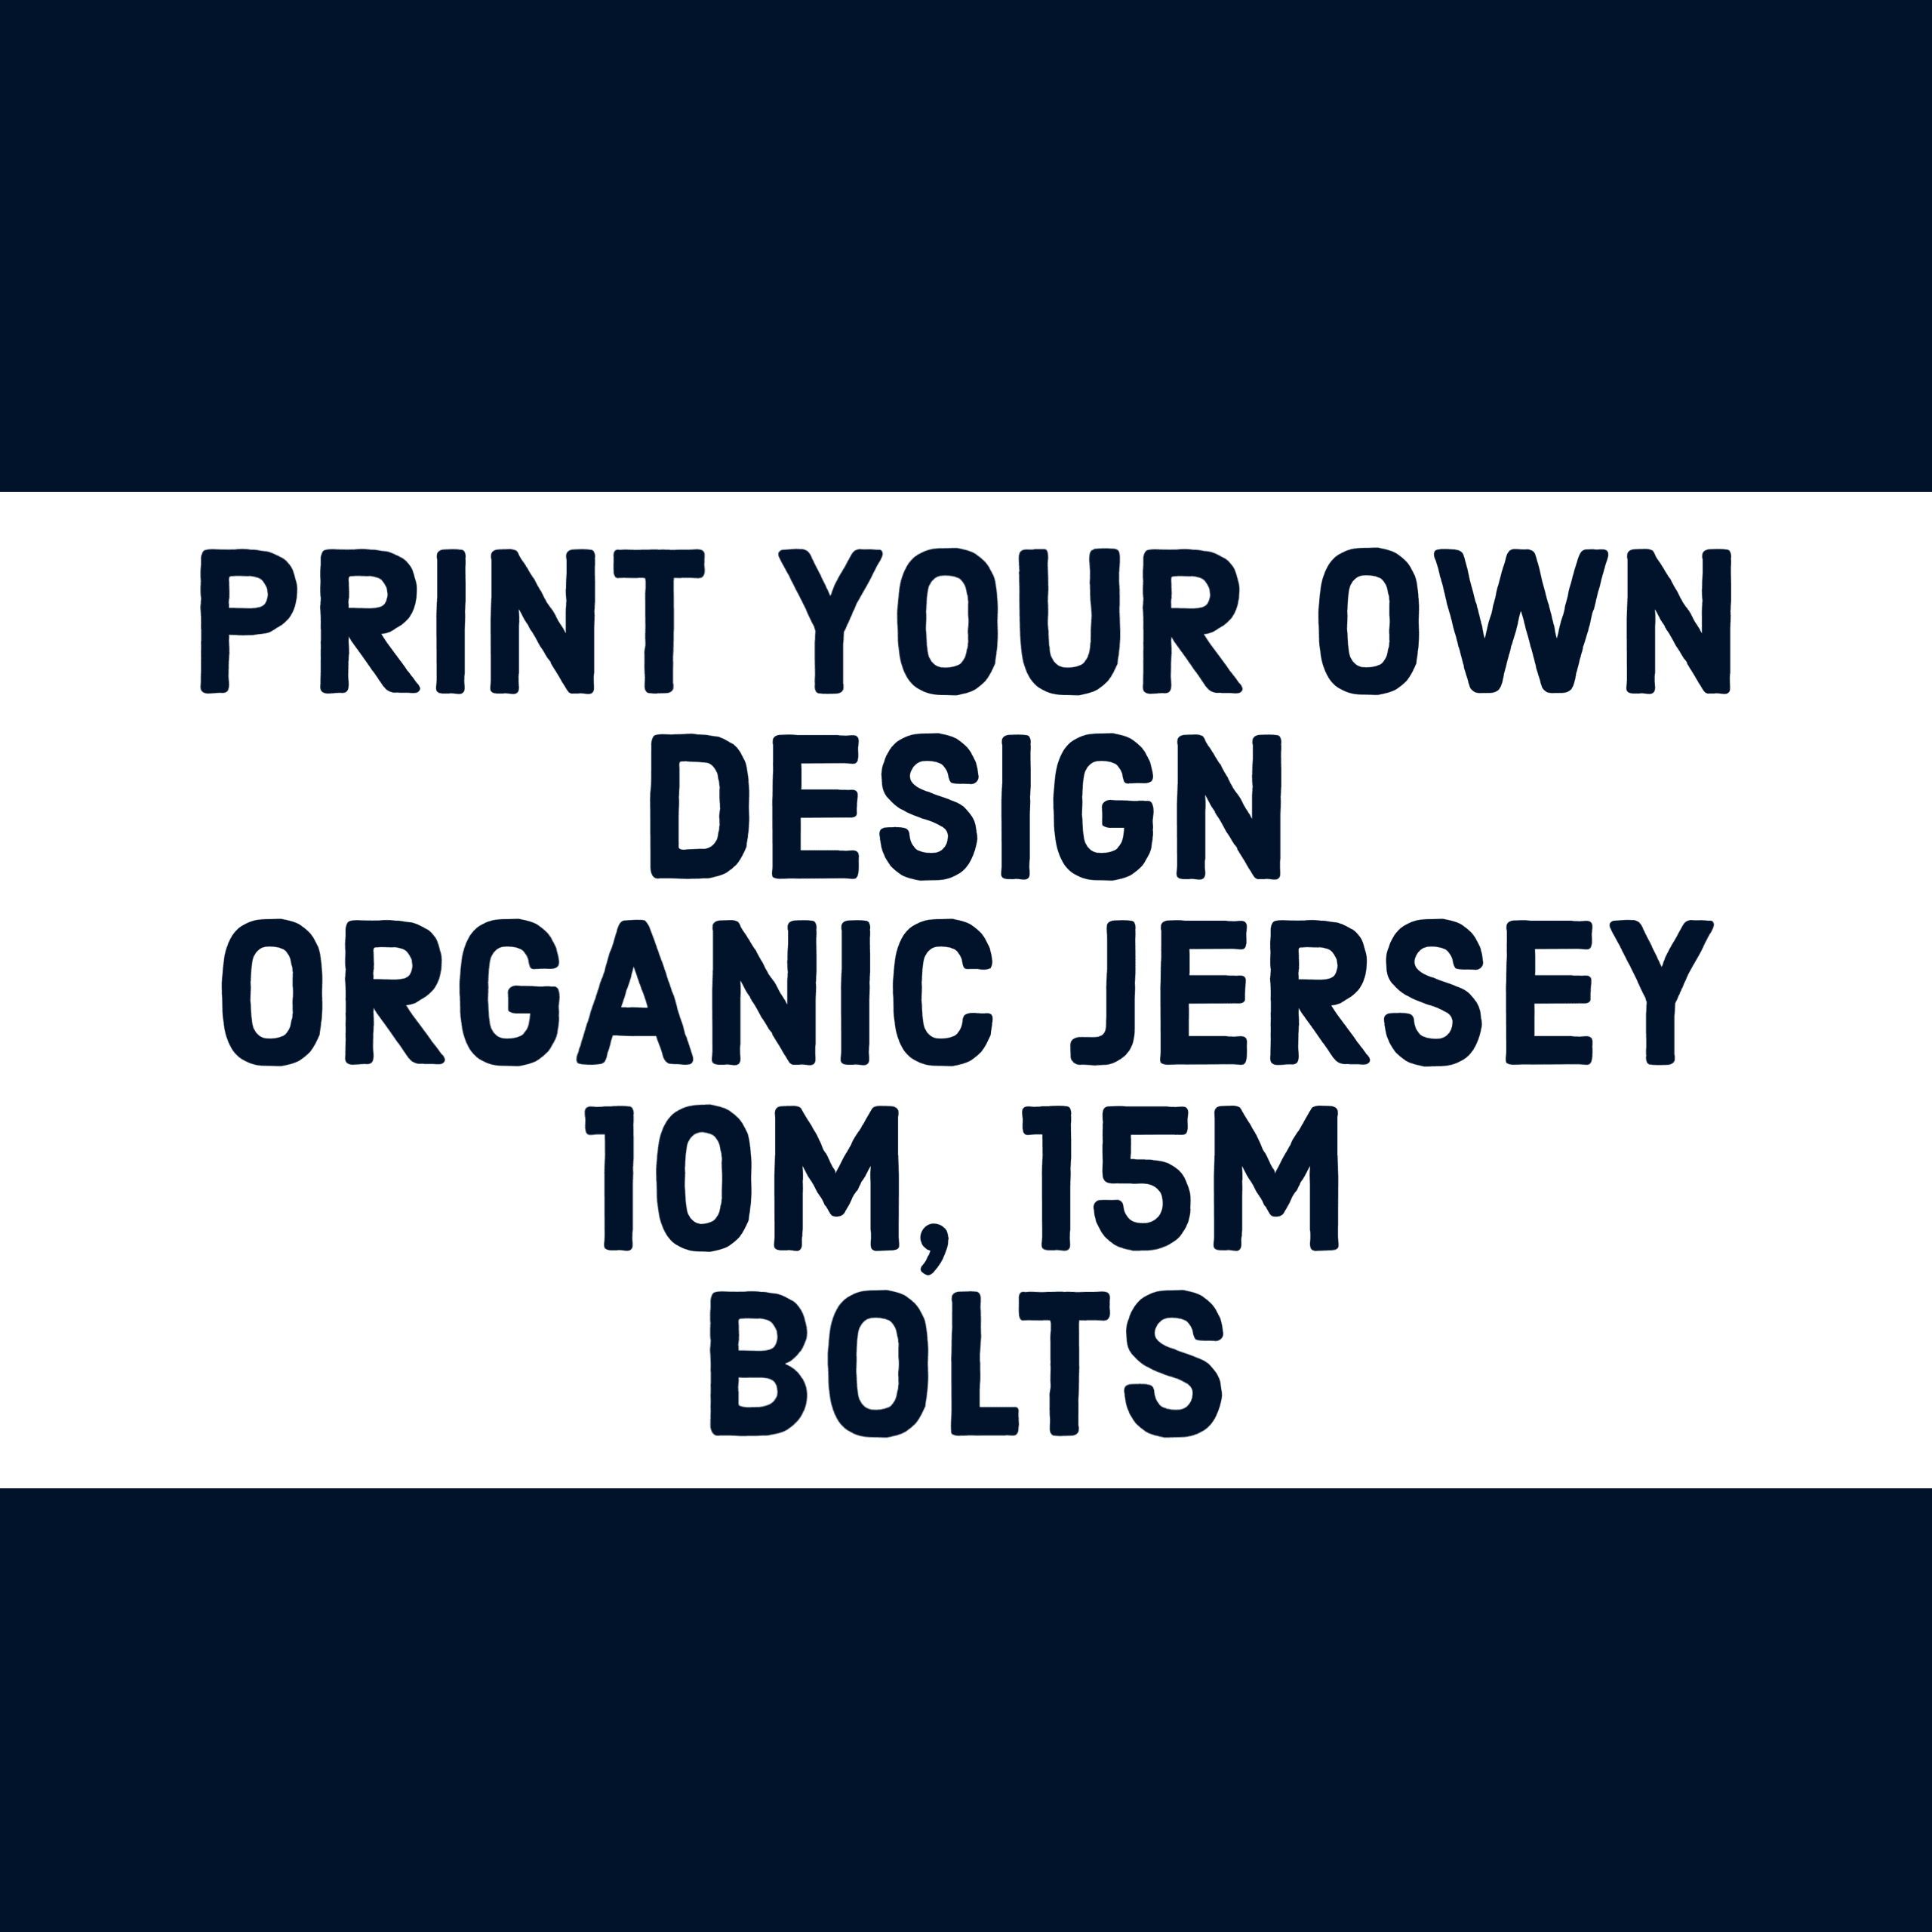 Print Your Own Design ORGANIC Cotton Jersey